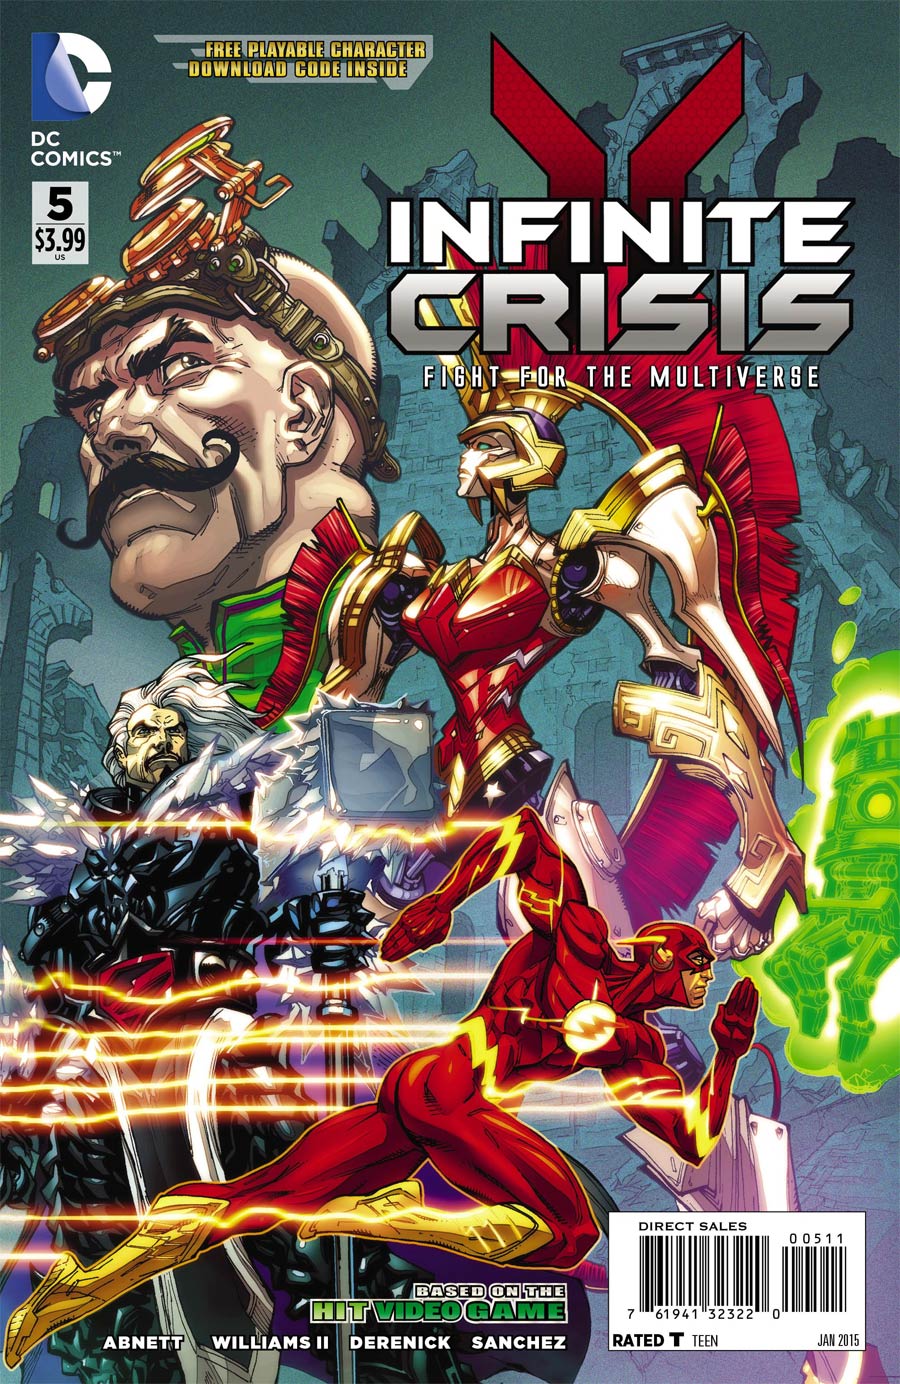 Infinite Crisis Fight For The Multiverse #5 Cover B Without Polybag